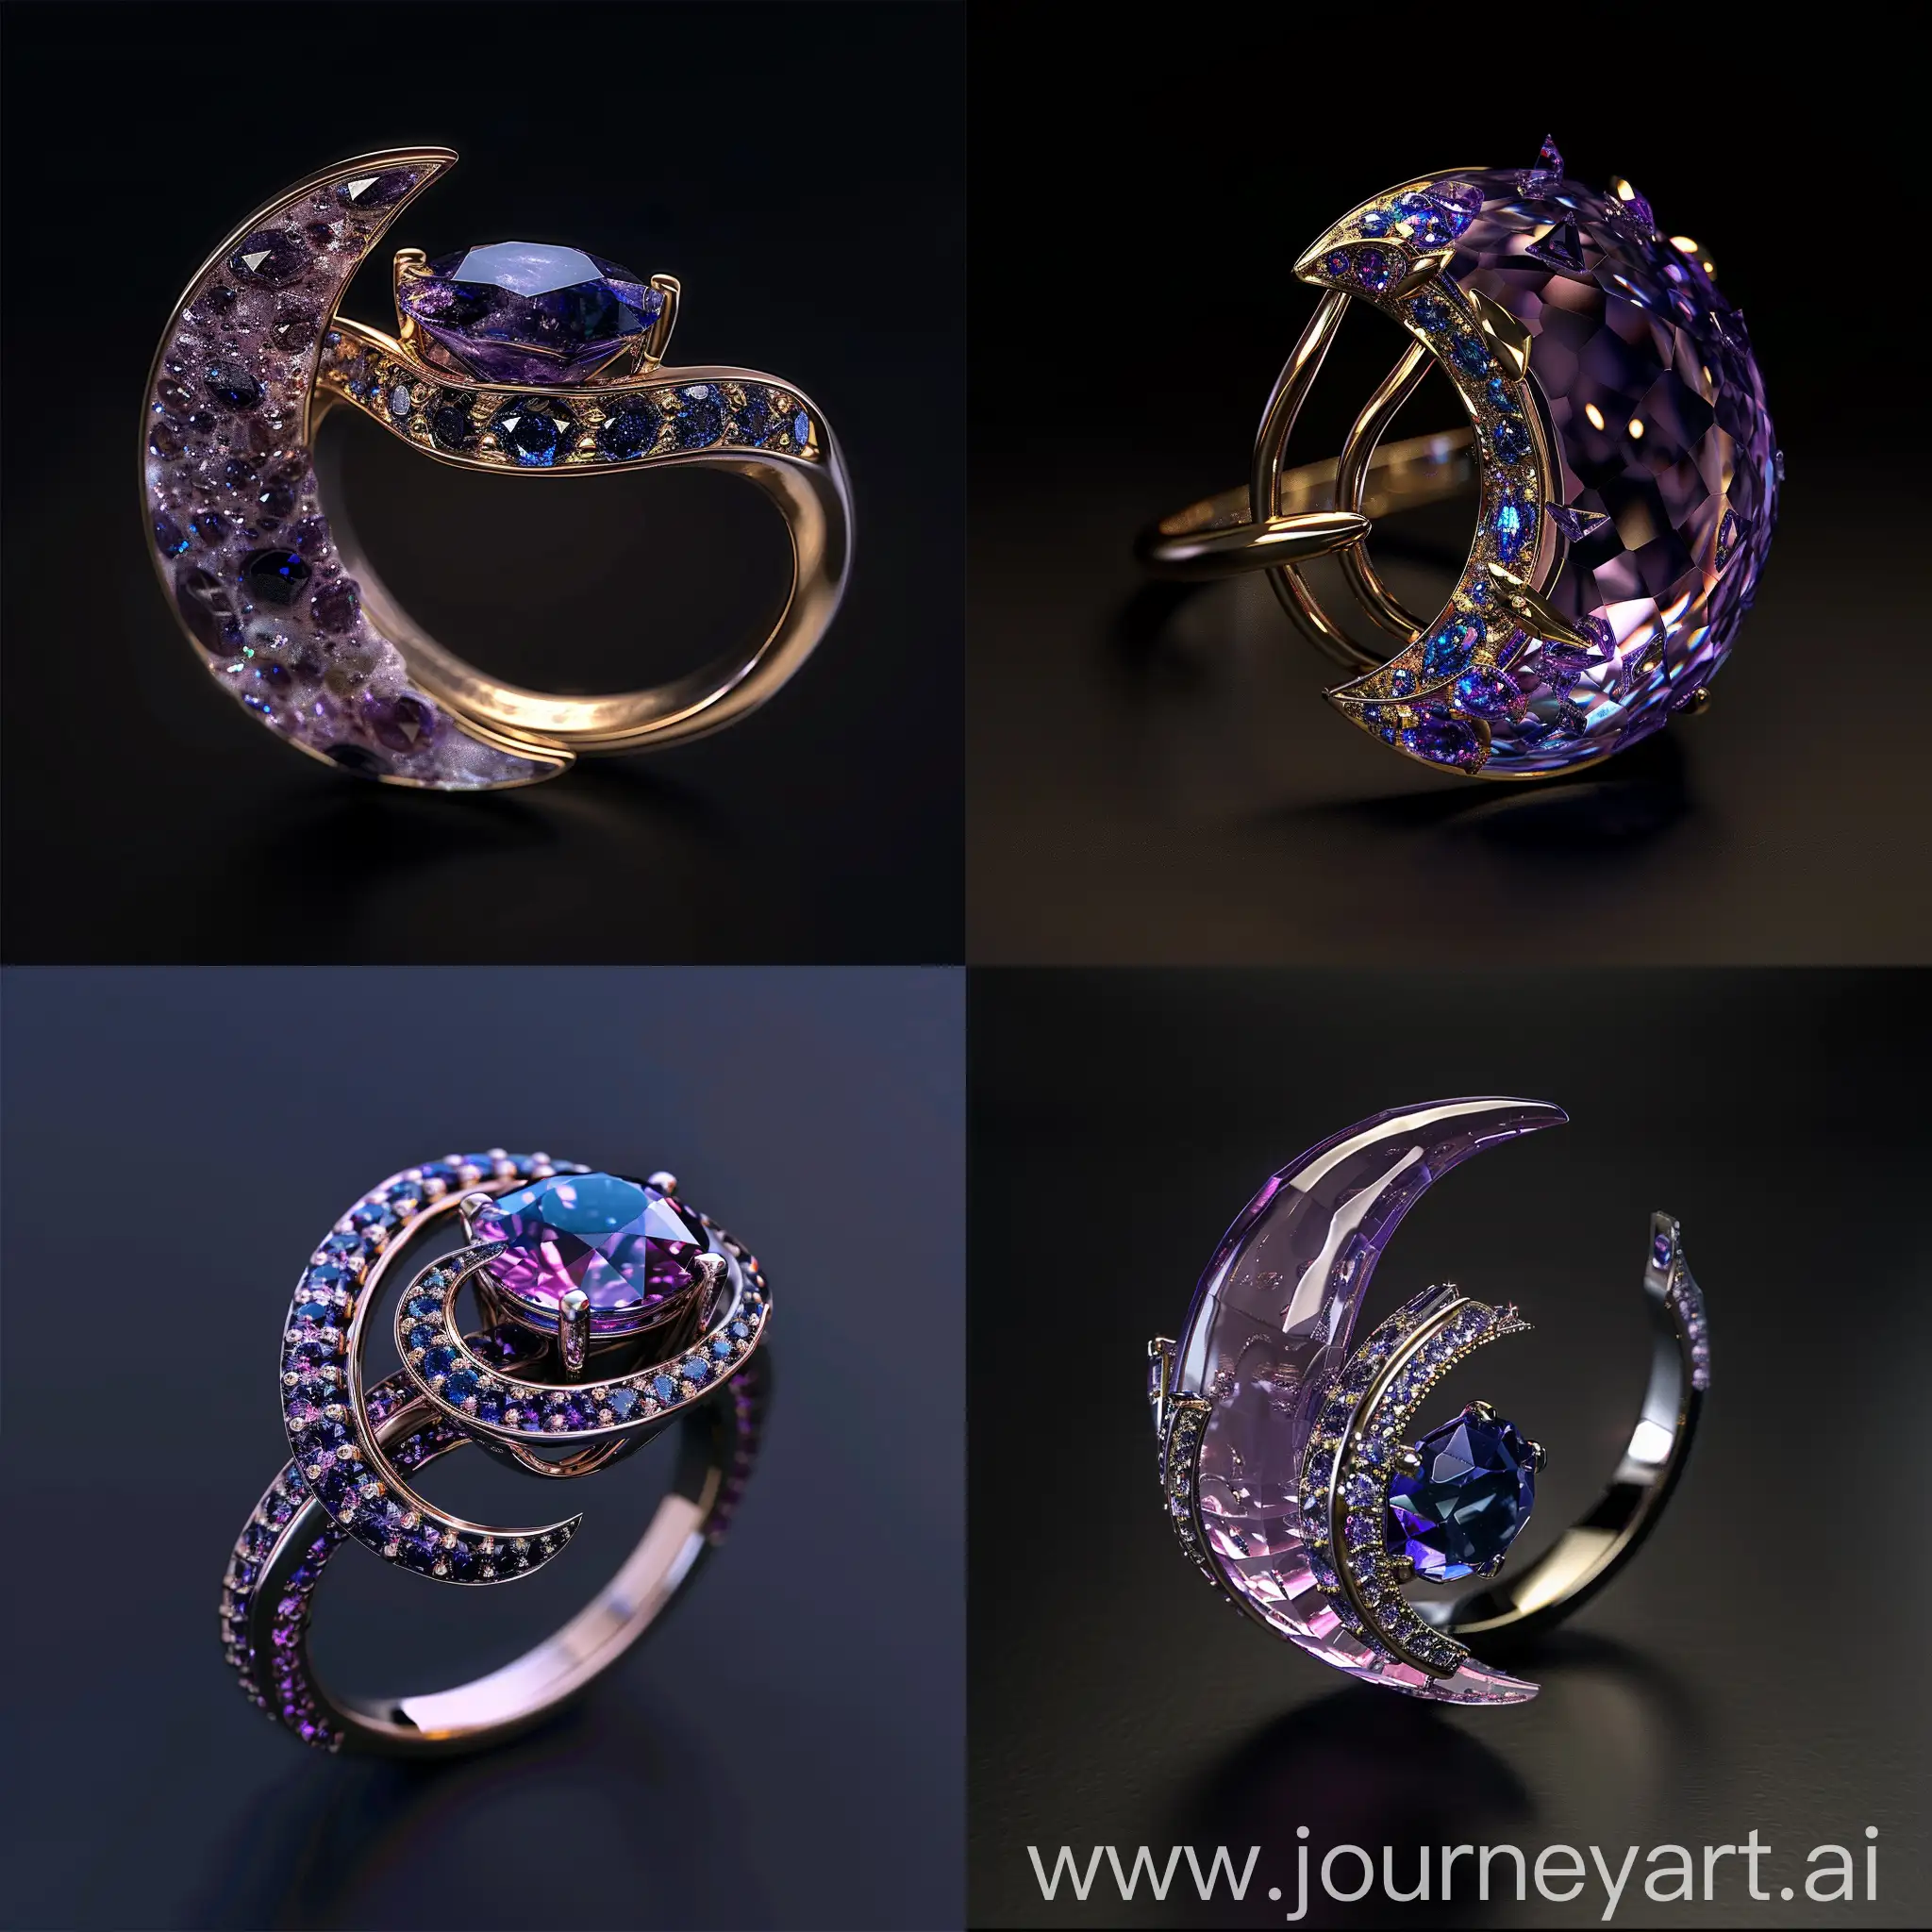 MoonShaped-Blue-Sapphire-in-a-Photorealistic-Amethyst-Ring